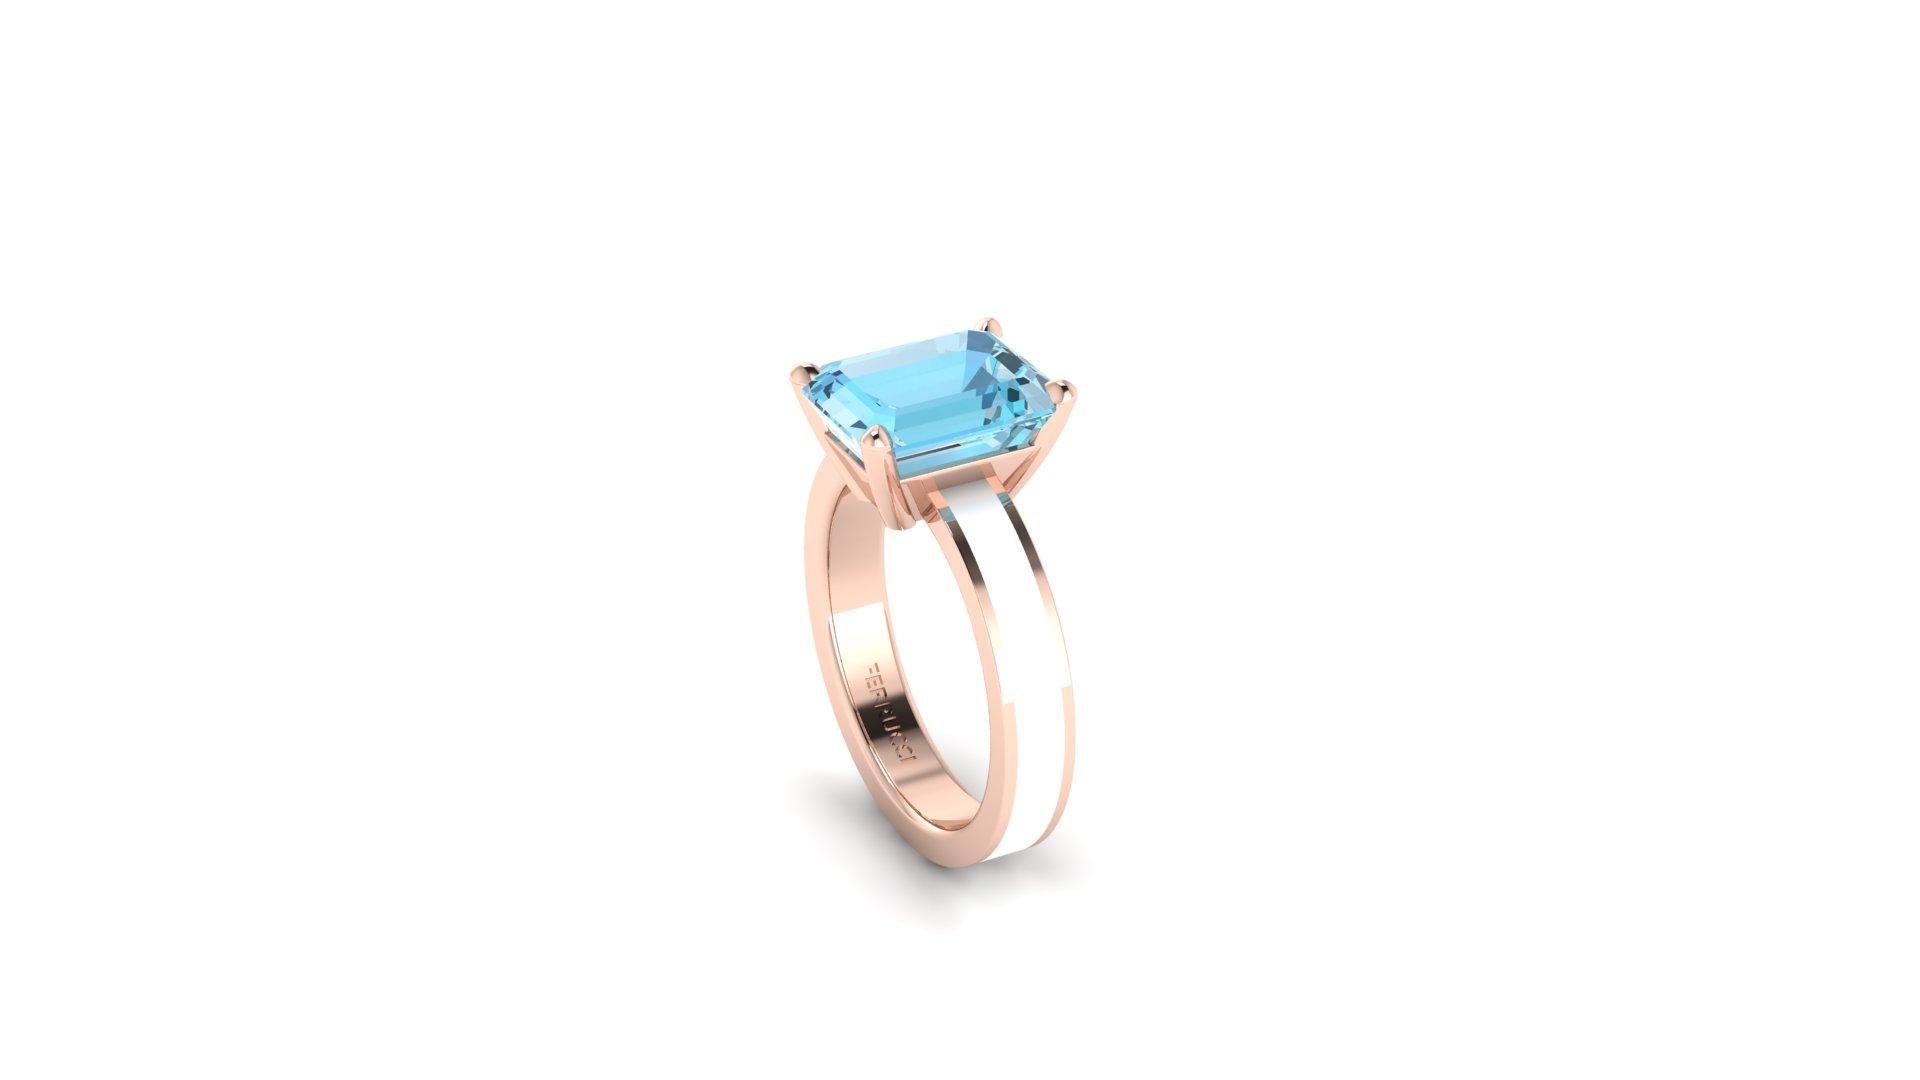 3.09 carats naturalAquamarine, emerald cut, very high quality color, eye clean gem and intense color, set in an 18k rose gold ring with white enamel eternity coated, manufactured with the best Italian manufacturing.
The ring size is 6, adjustable